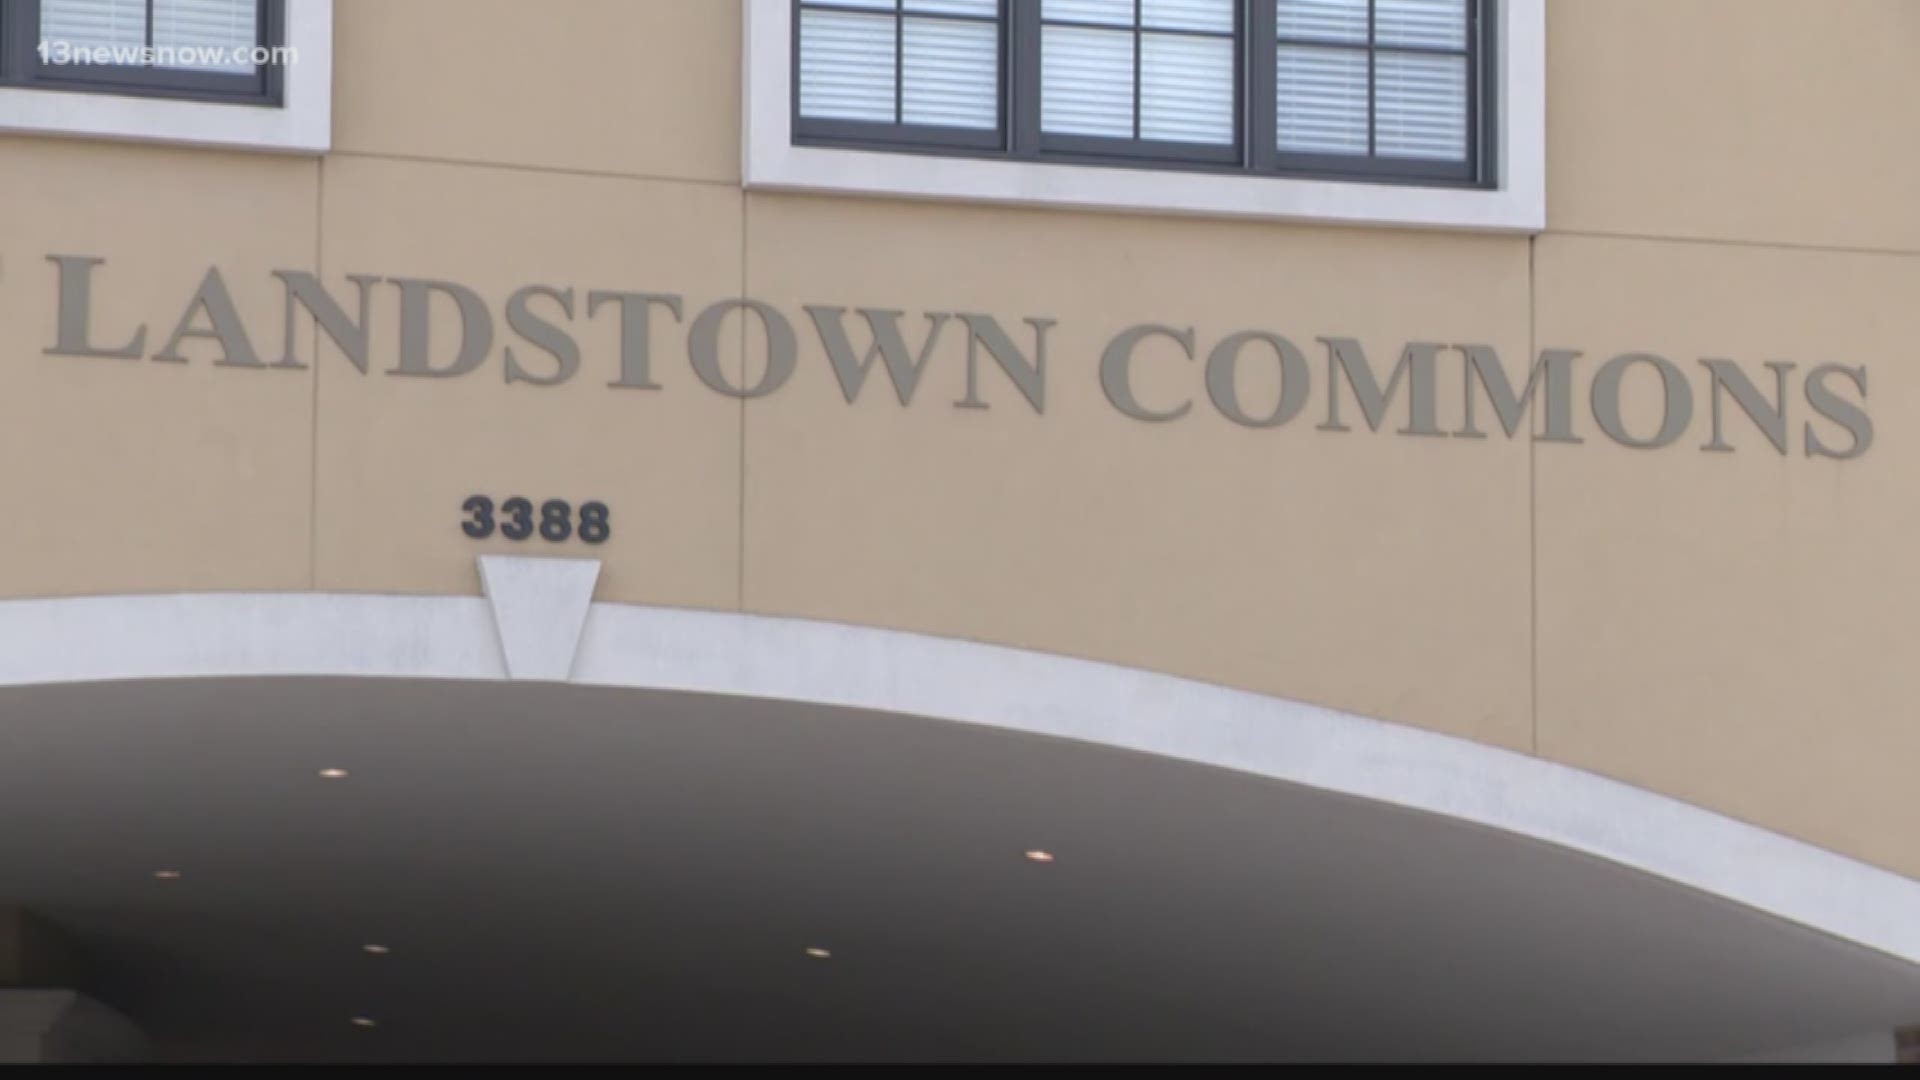 13News Now Meghan Puryear talked to shoppers about safety concerns after a man was allegedly exposing himself to women at the Landstown Commons Shopping Center.